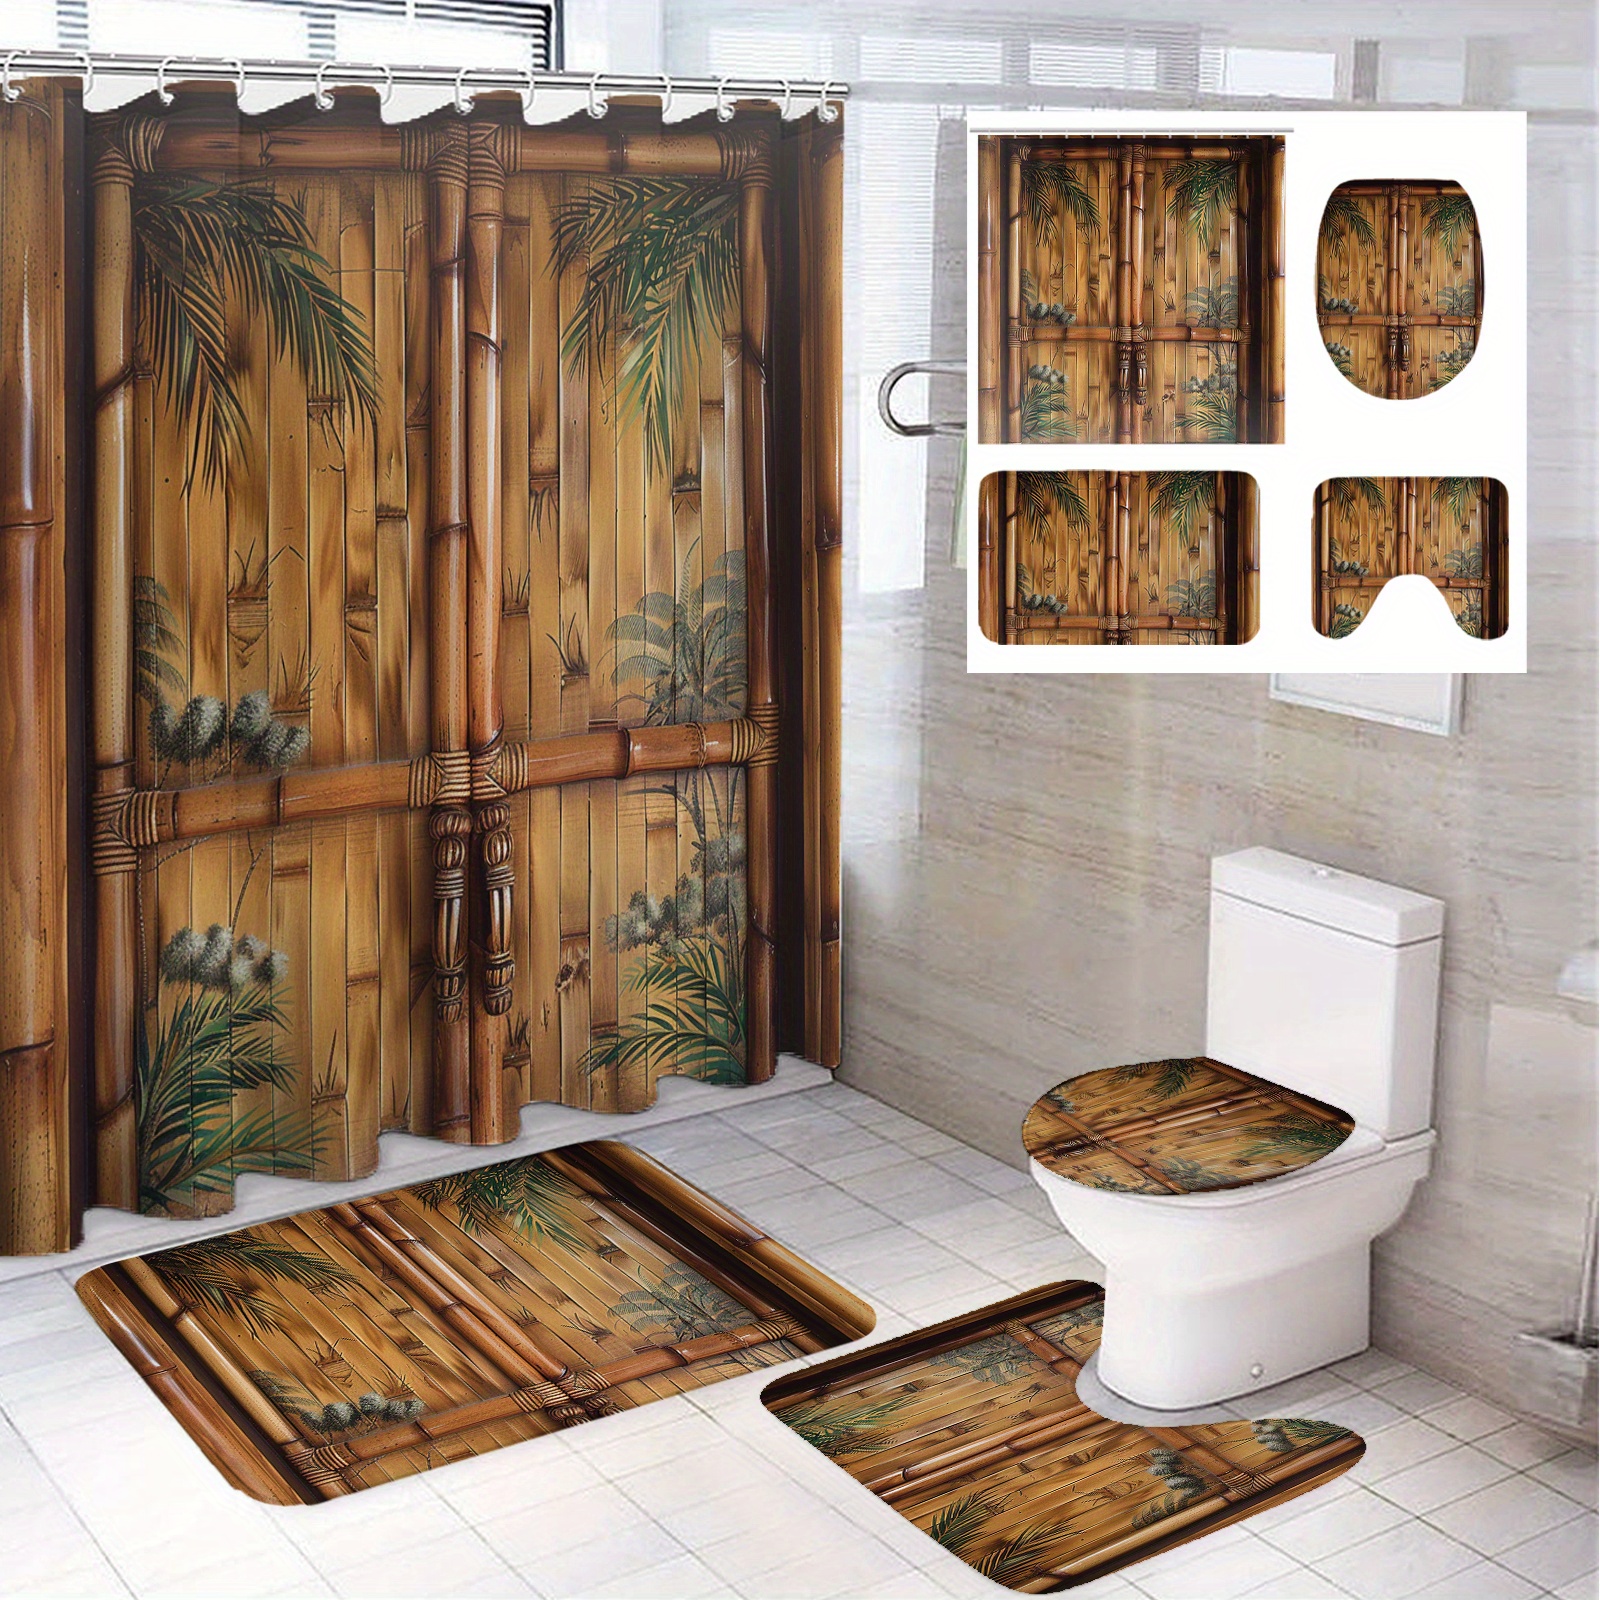 

1/4pcs Bamboo Door Pattern Modern Bathroom Decoration, Polyester Bathroom Set With 12 Hooks, Bathroom Non-slip Floor Mat, Toilet Seat Cover And U-shaped Mat Home Decoration 71*71in